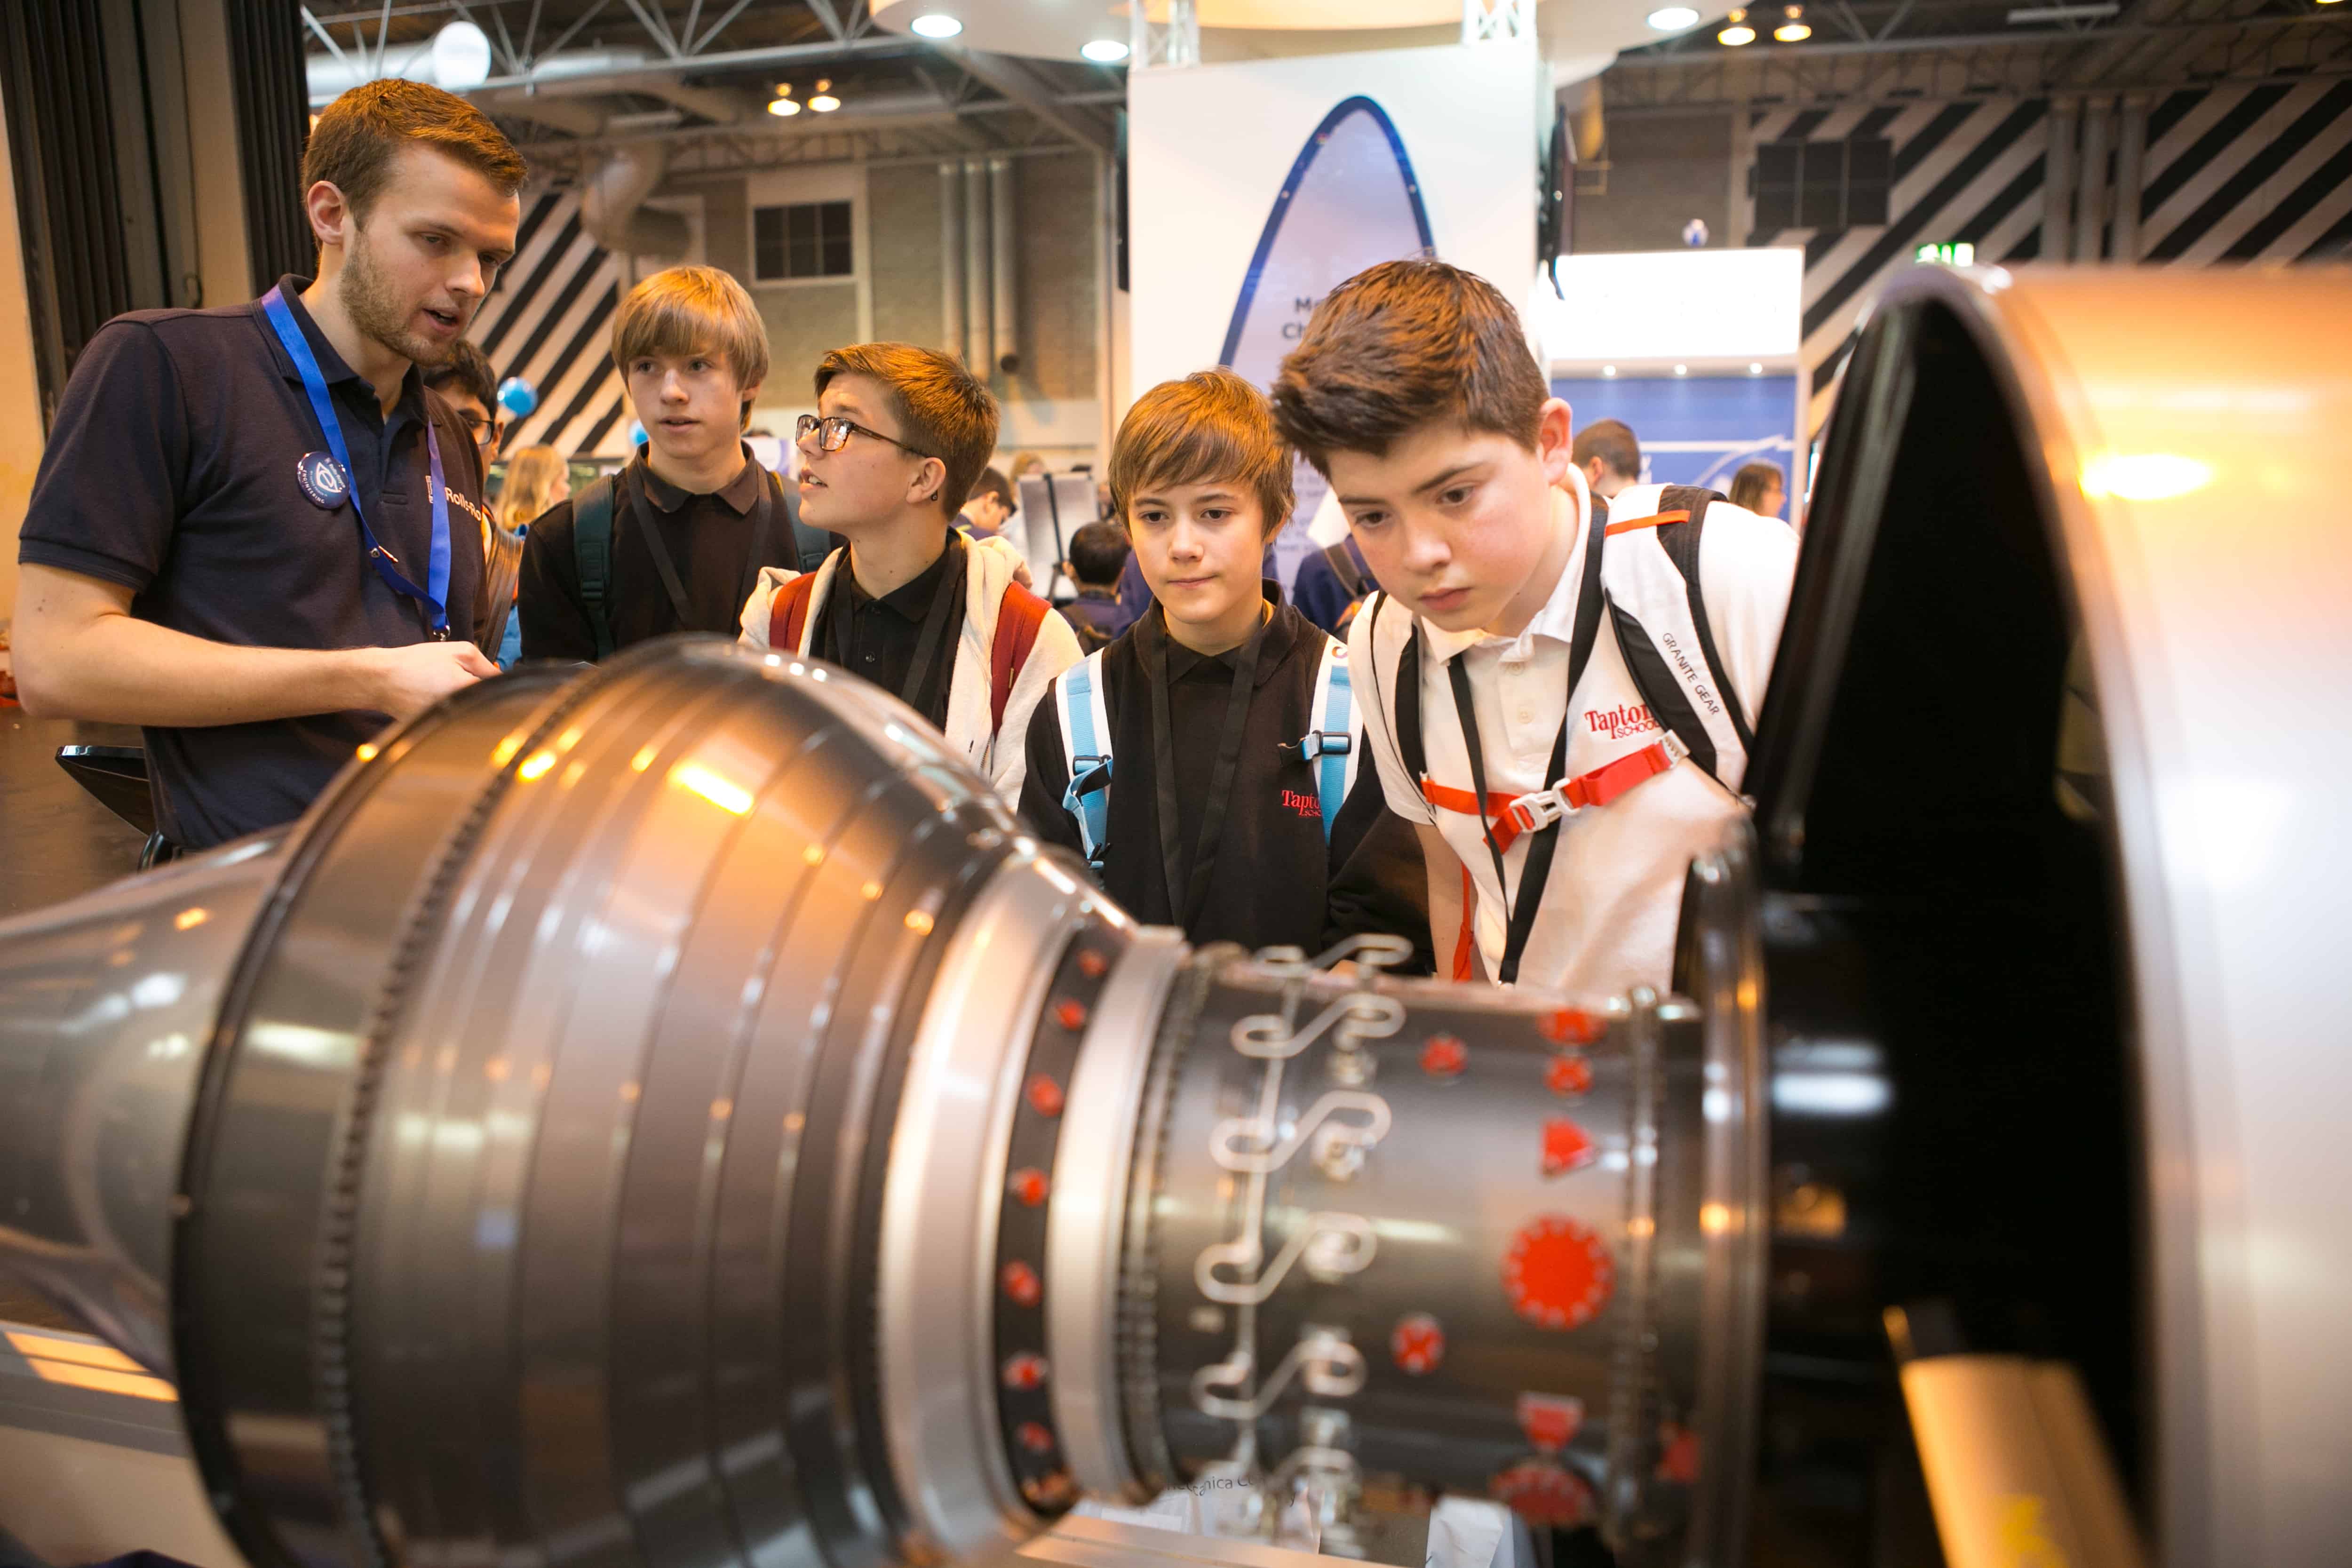 Budding engineers will be enthused by experts in a huge range of technologies at the Big Bang Fair